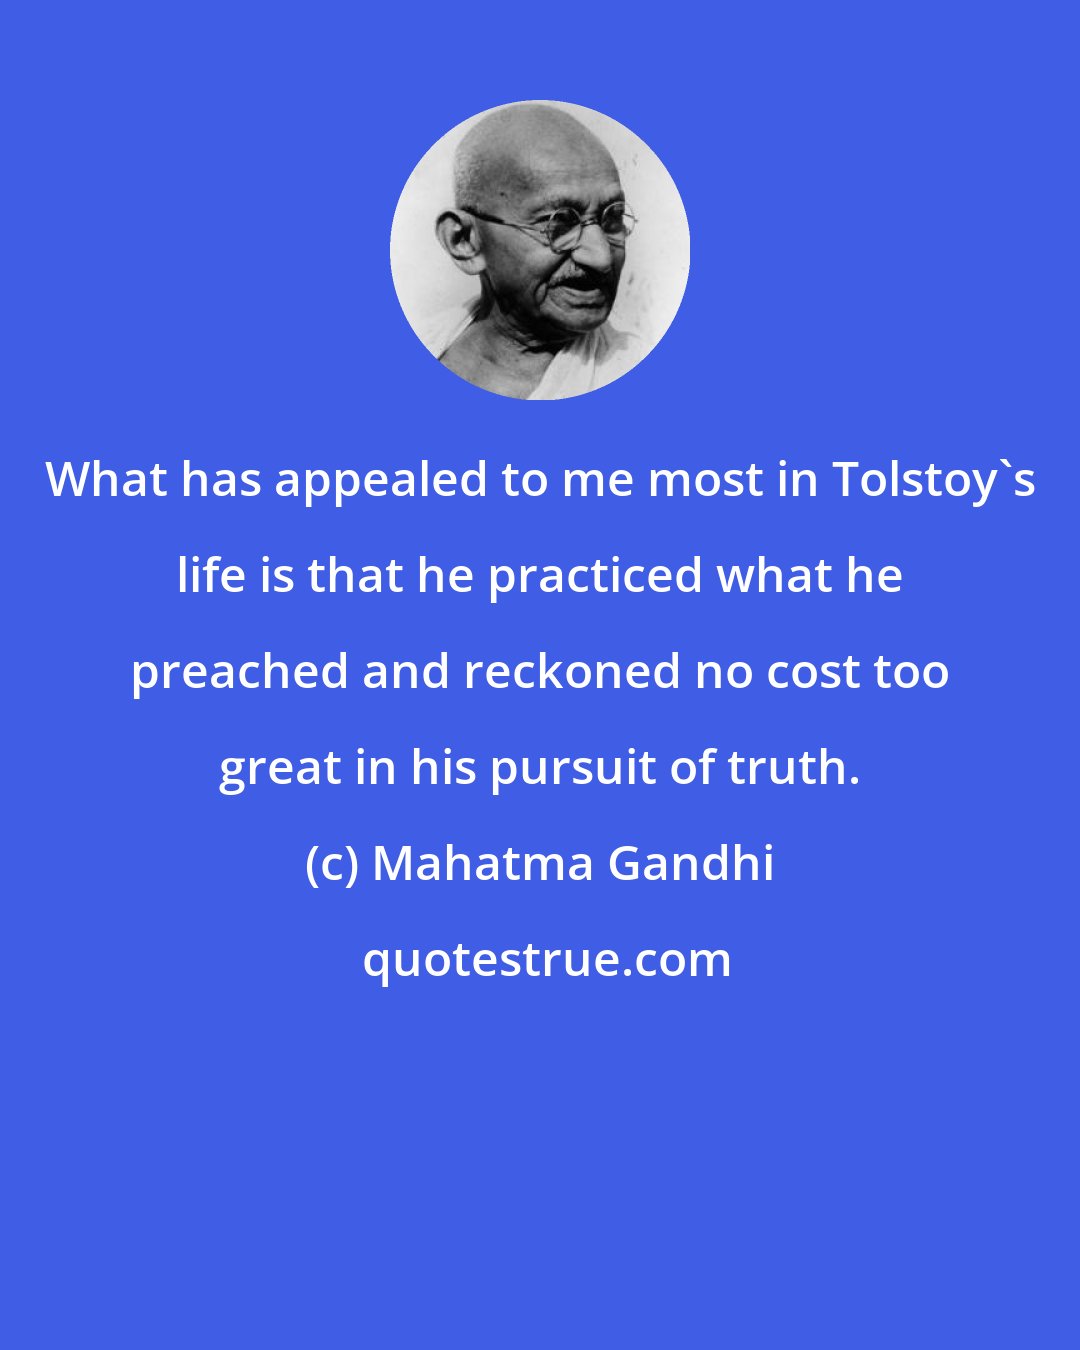 Mahatma Gandhi: What has appealed to me most in Tolstoy's life is that he practiced what he preached and reckoned no cost too great in his pursuit of truth.